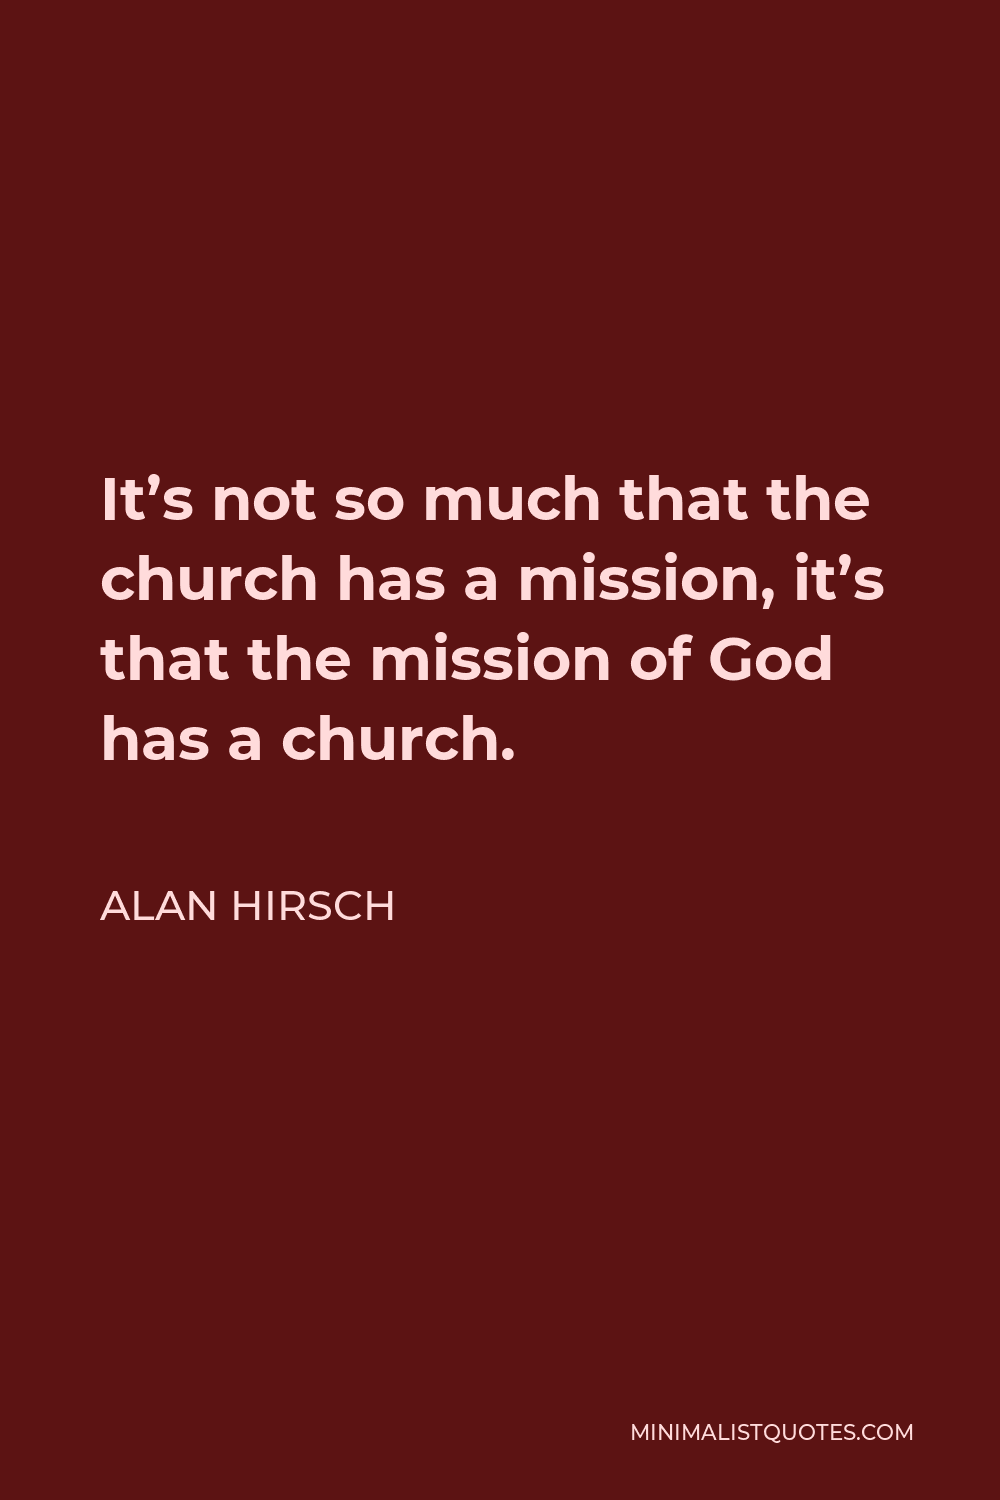 Alan Hirsch Quote - It’s not so much that the church has a mission, it’s that the mission of God has a church.